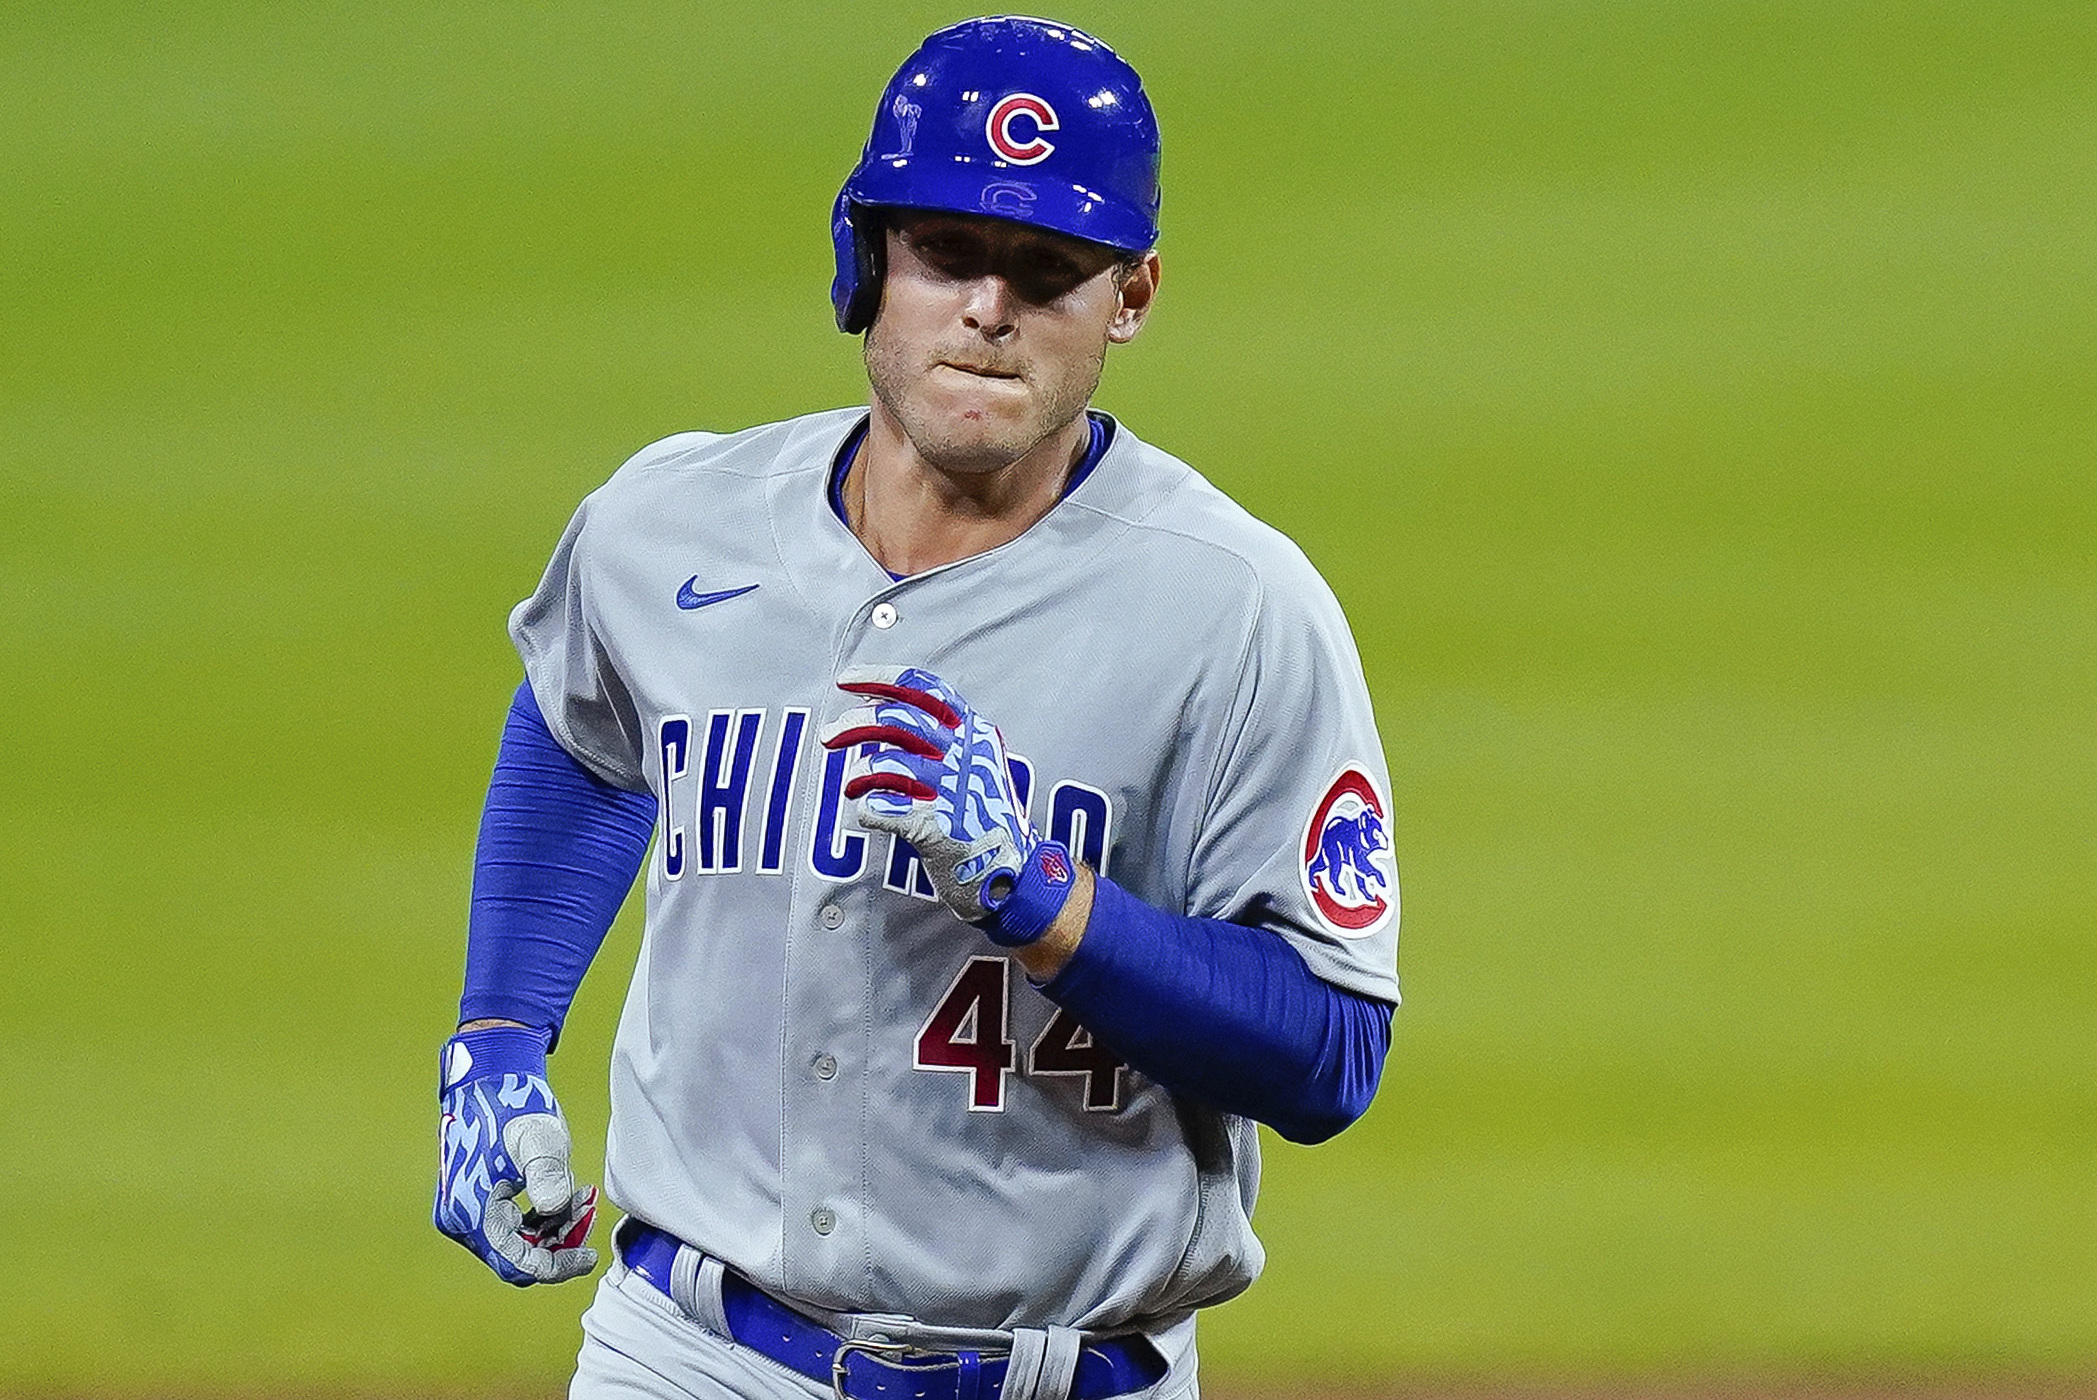 Cubs' Anthony Rizzo Calls out MLB over Rain-Delay Protocols Amid